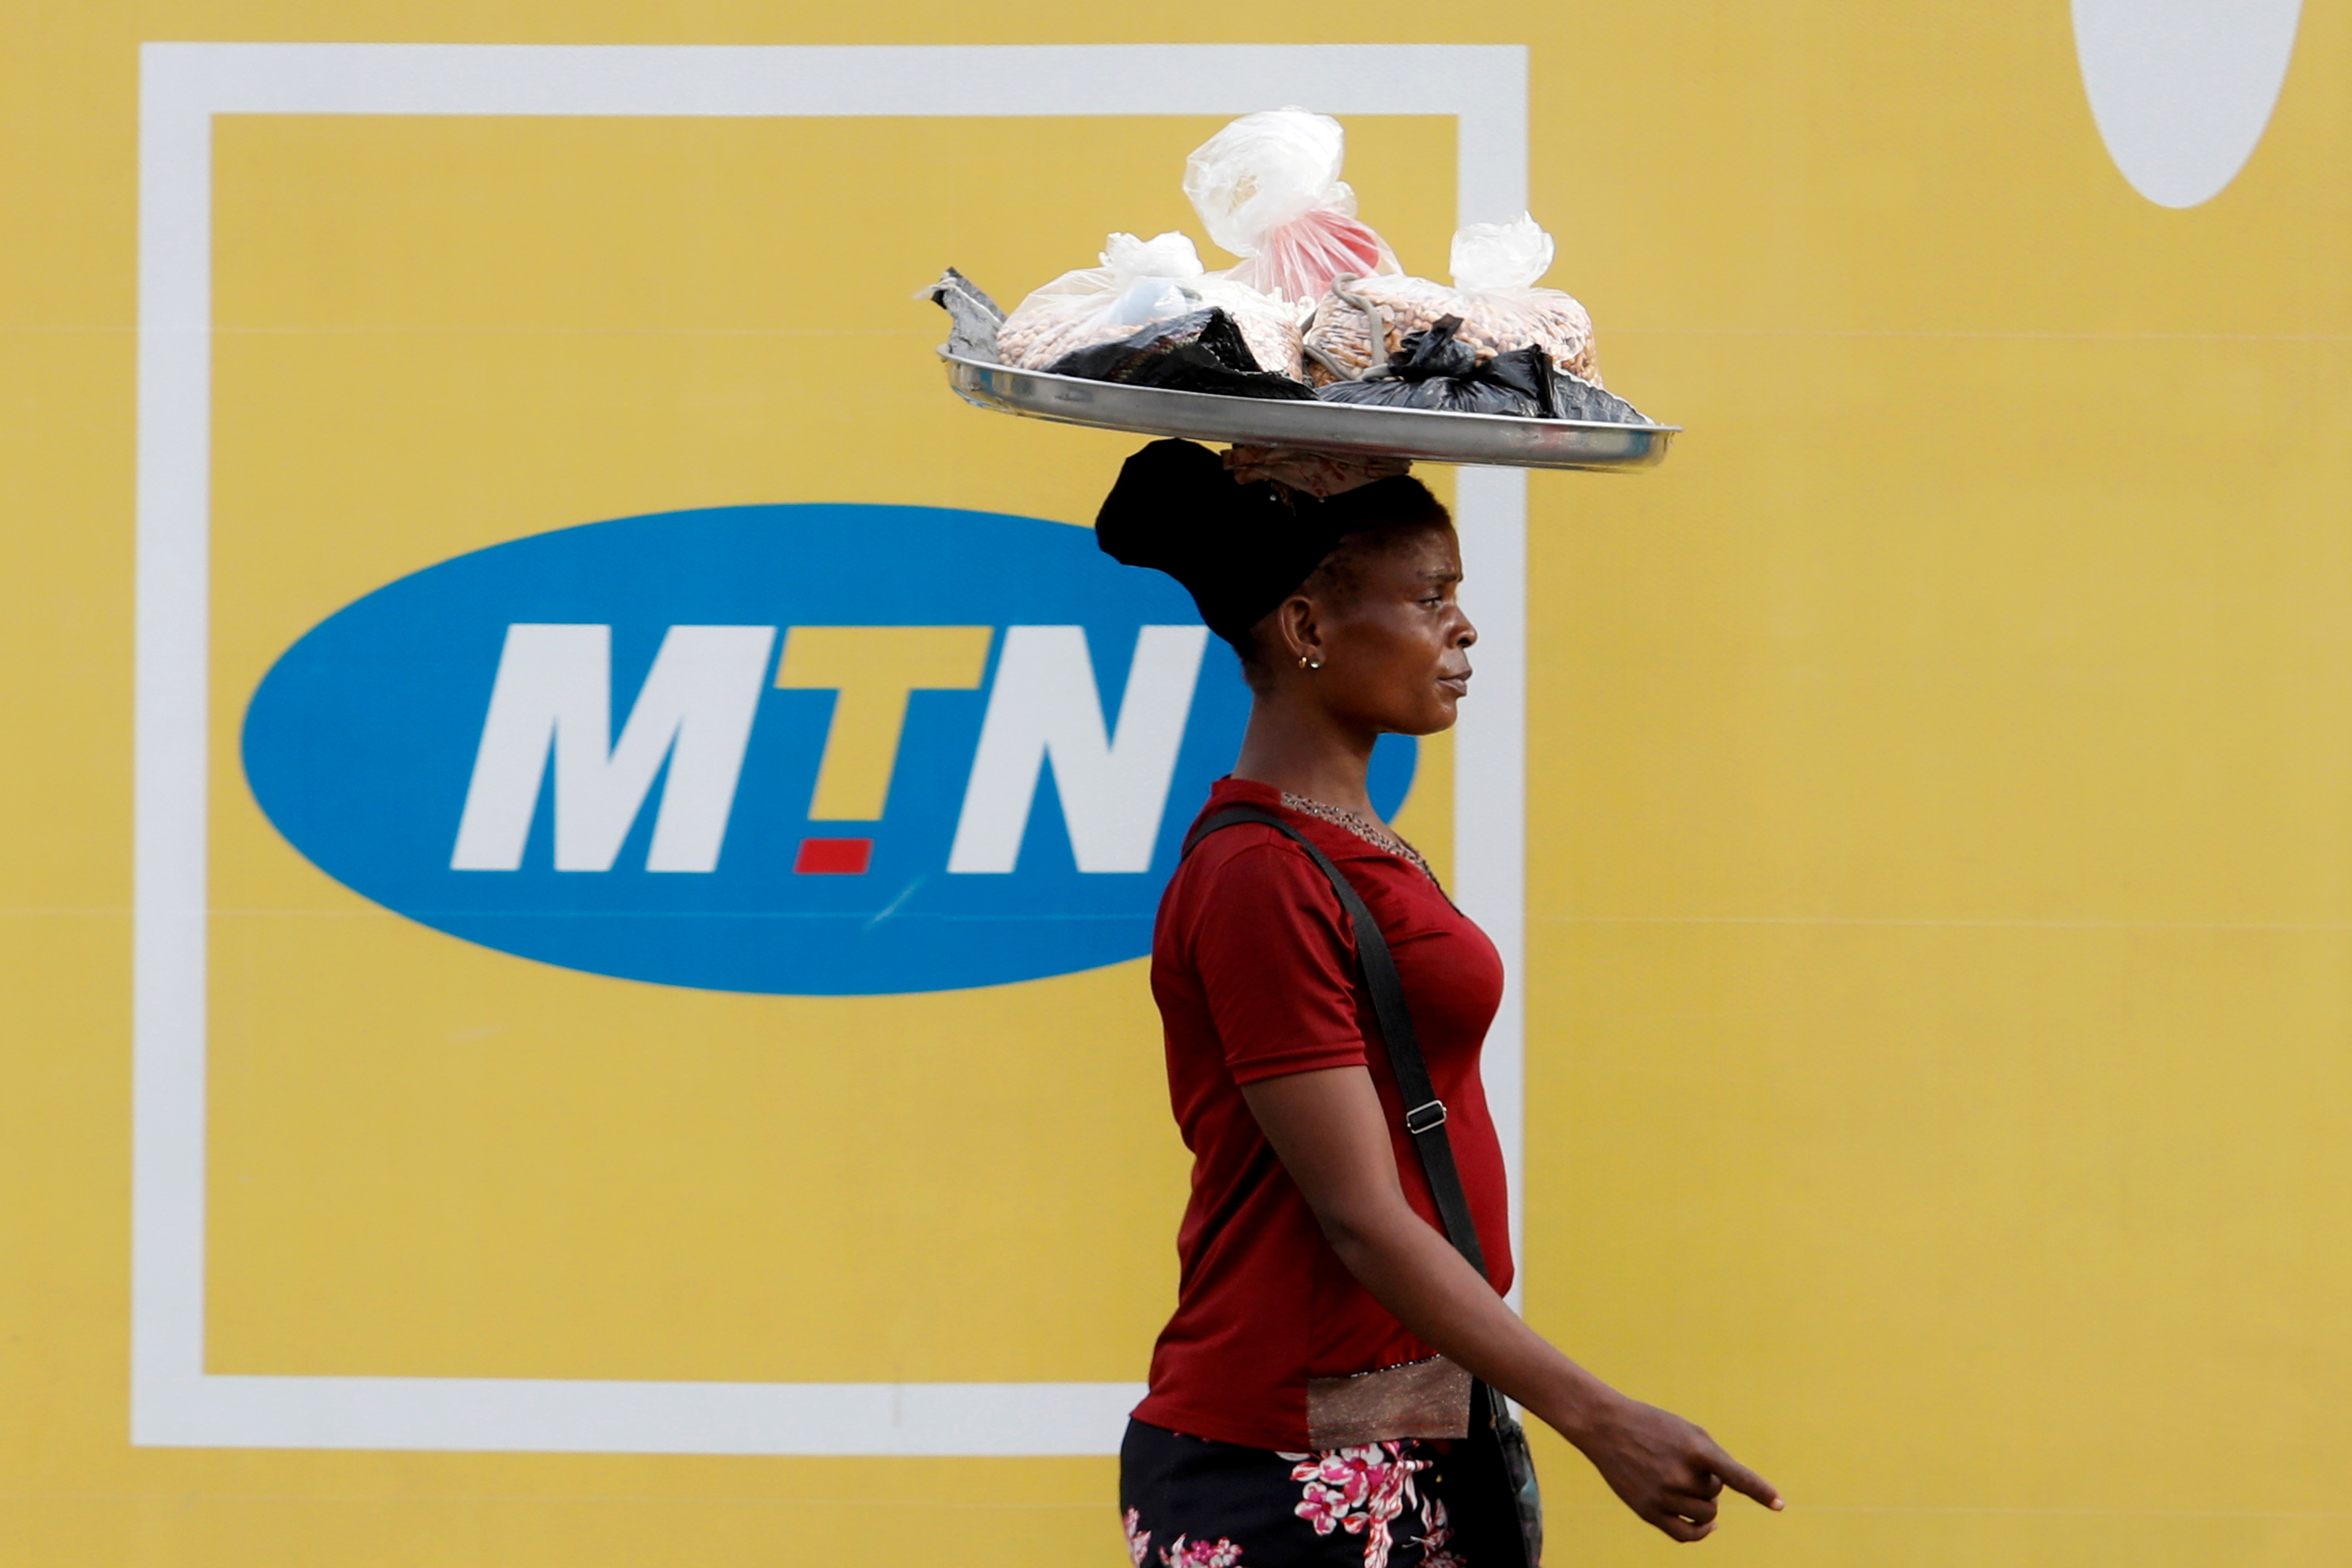   A woman walks past an advertising posters for MTN telecommunication company along a street in Lagos, Nigeria August 28, 2019. REUTERS/Temilade Adelaja/File Photo